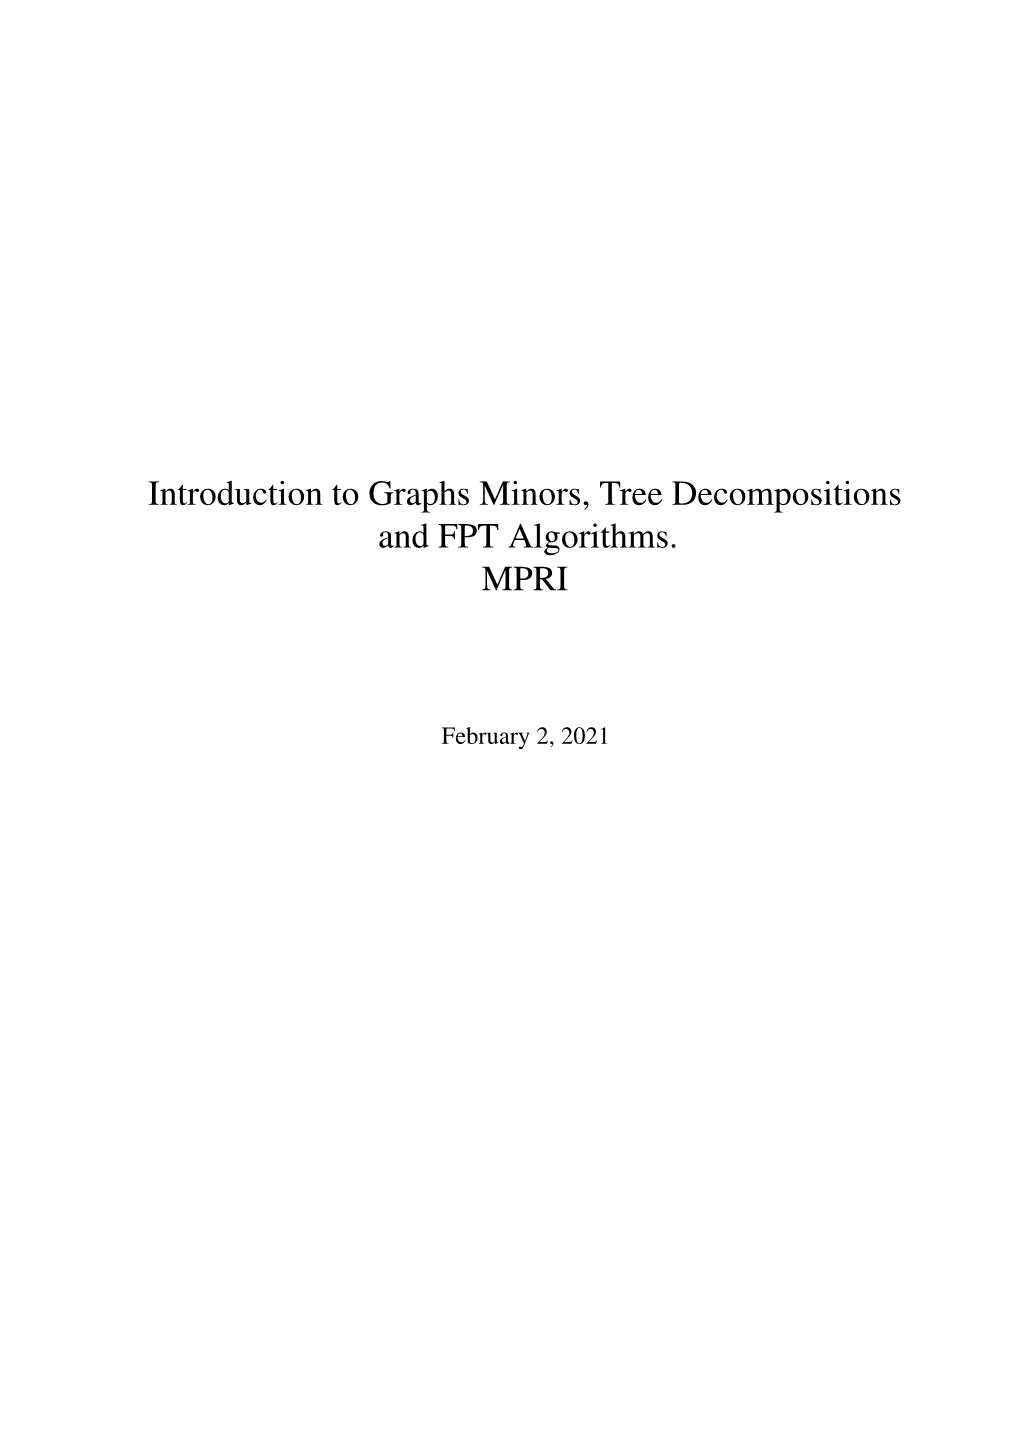 Introduction to Graphs Minors, Tree Decompositions and FPT Algorithms. MPRI